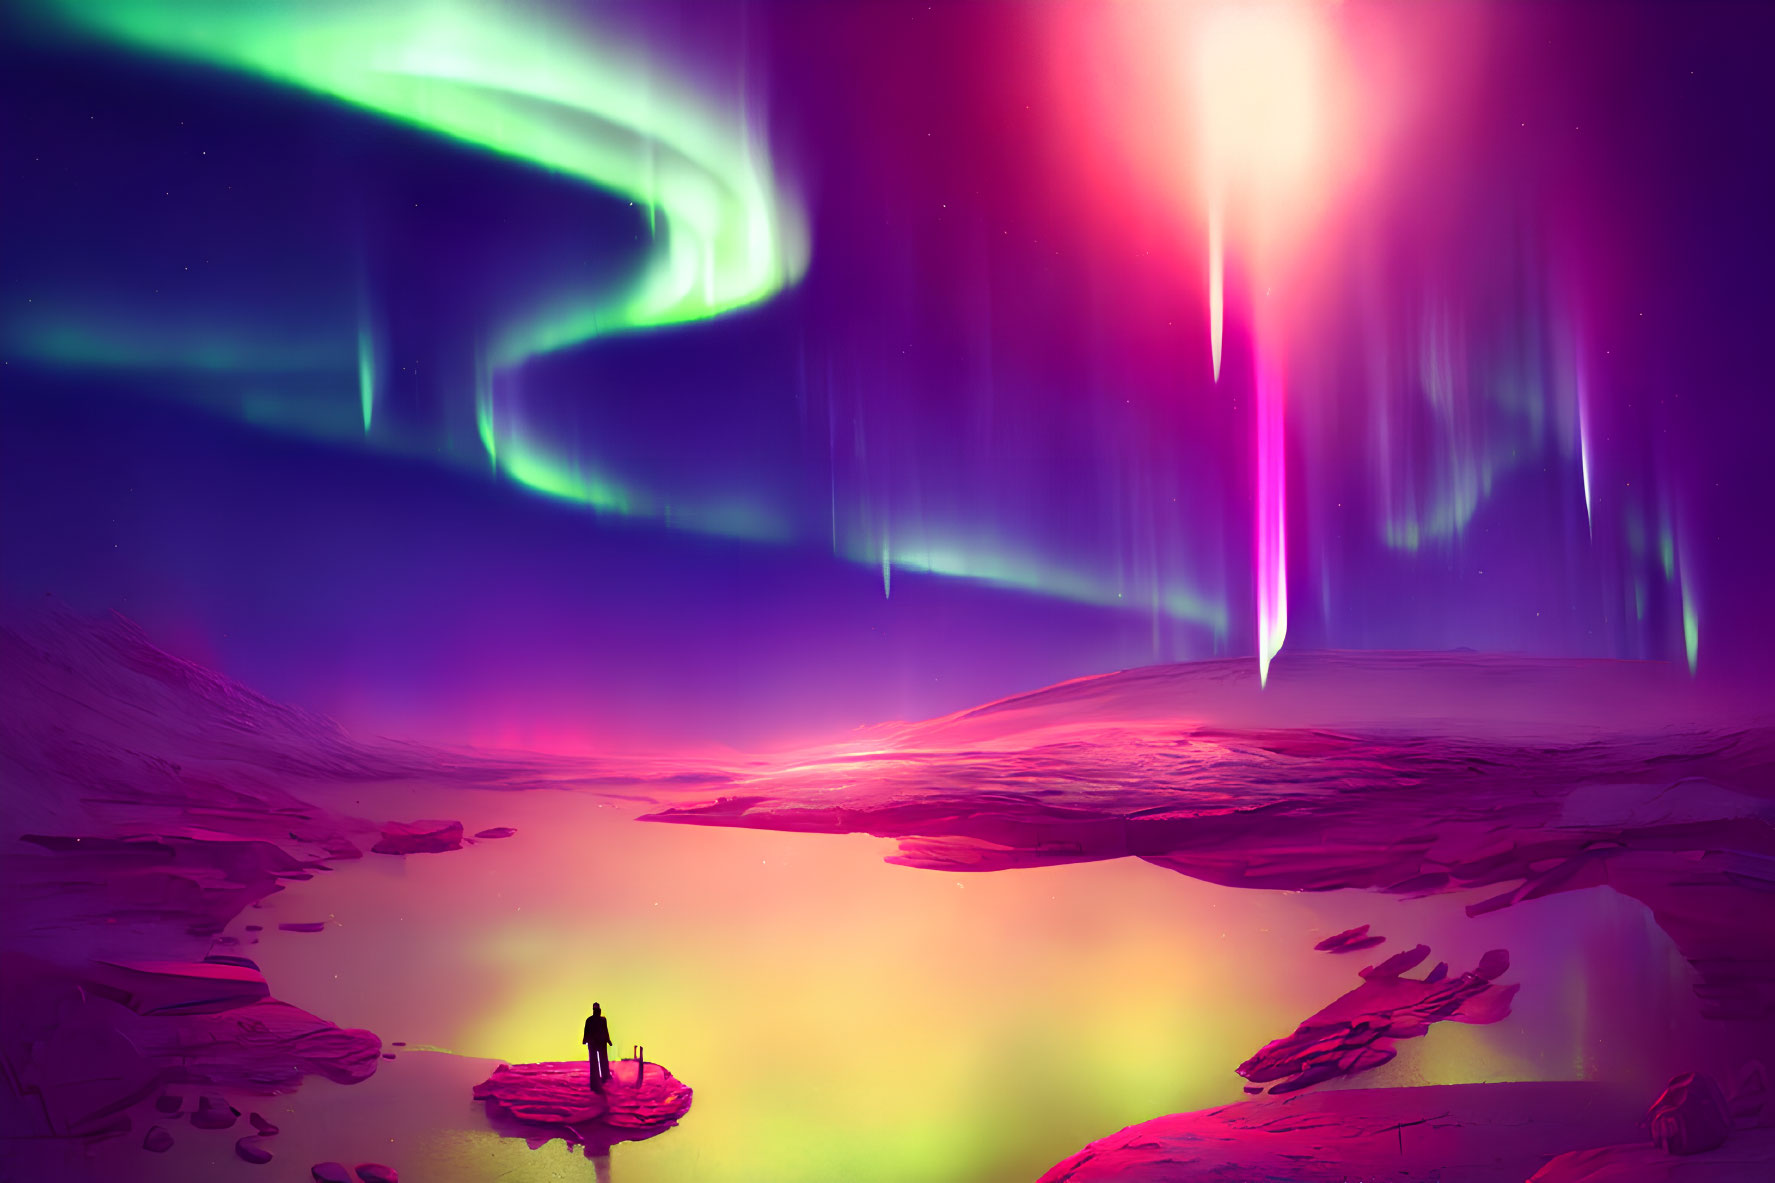 Person standing on rock in colorful alien landscape with vivid auroras and glowing surface